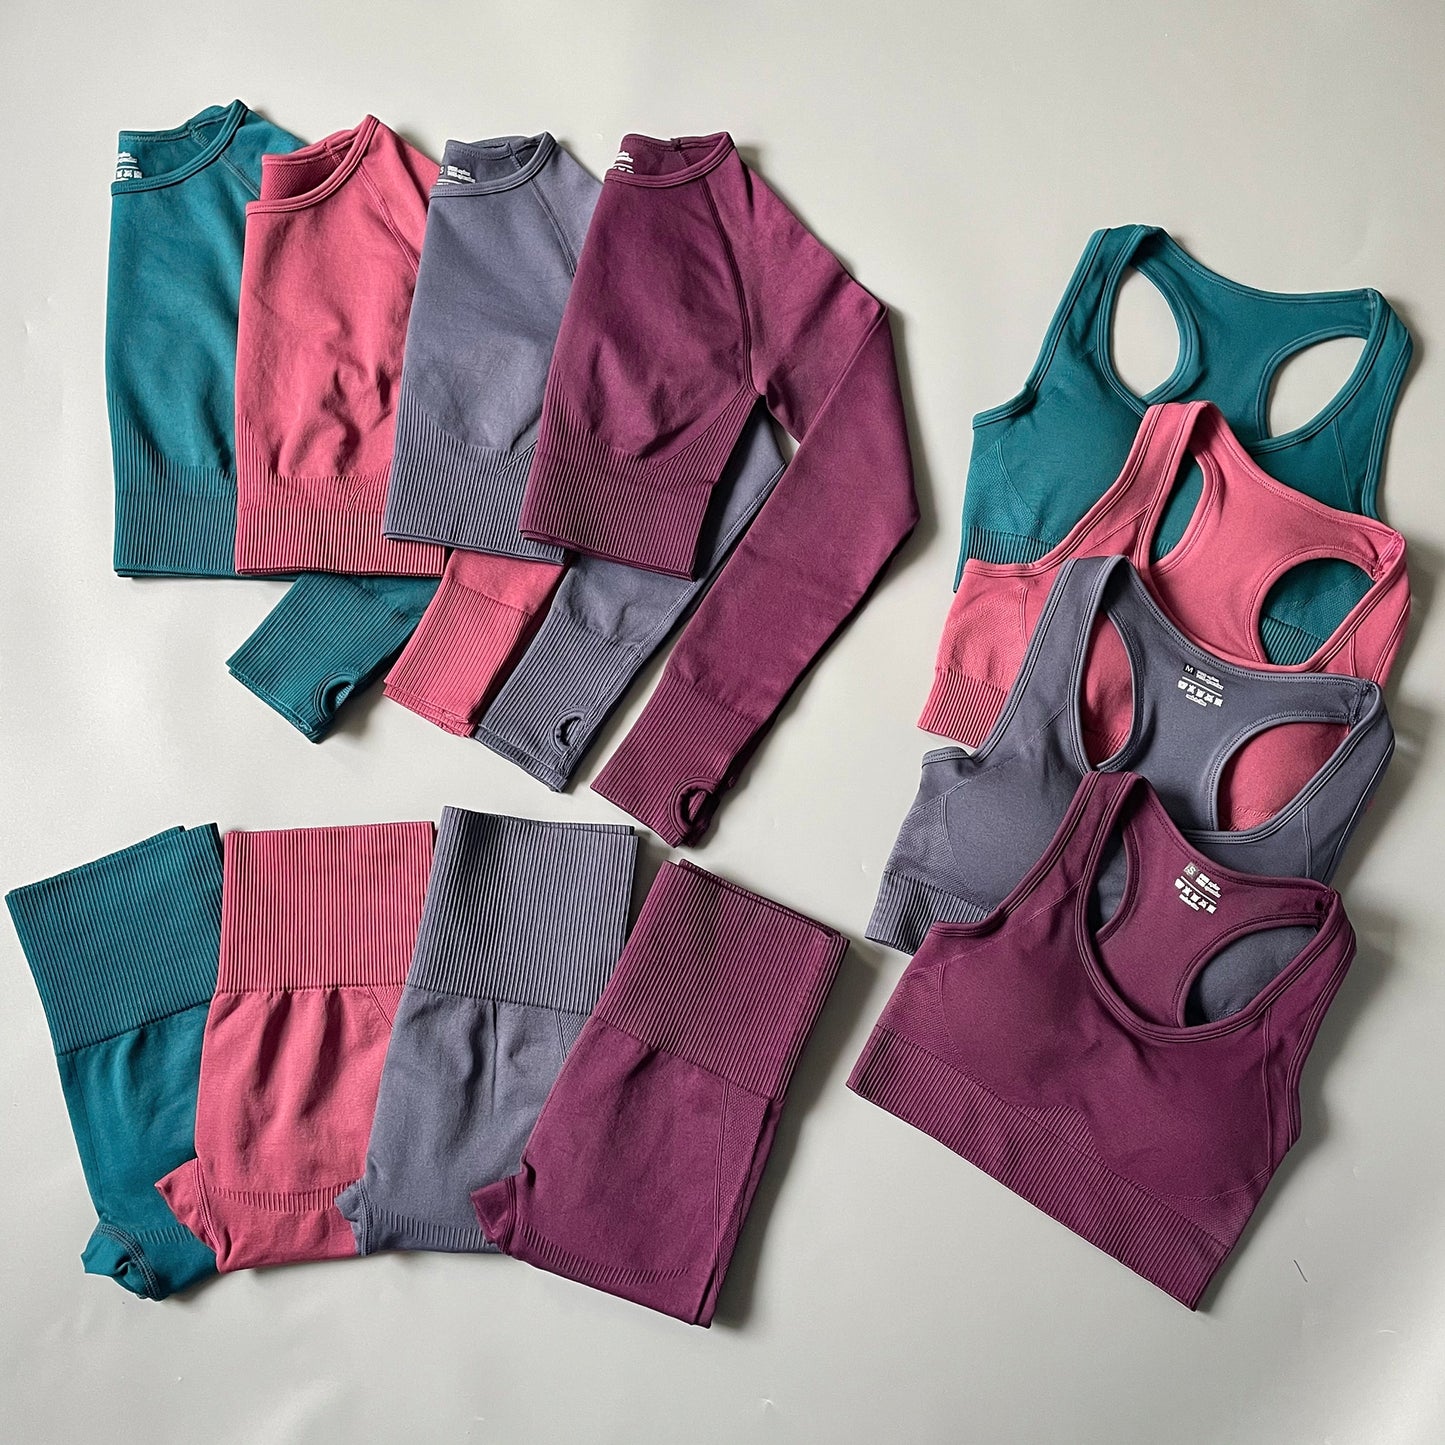 3 Yoga Set Workout Gym Clothing Fitness for Women's Tracksuit